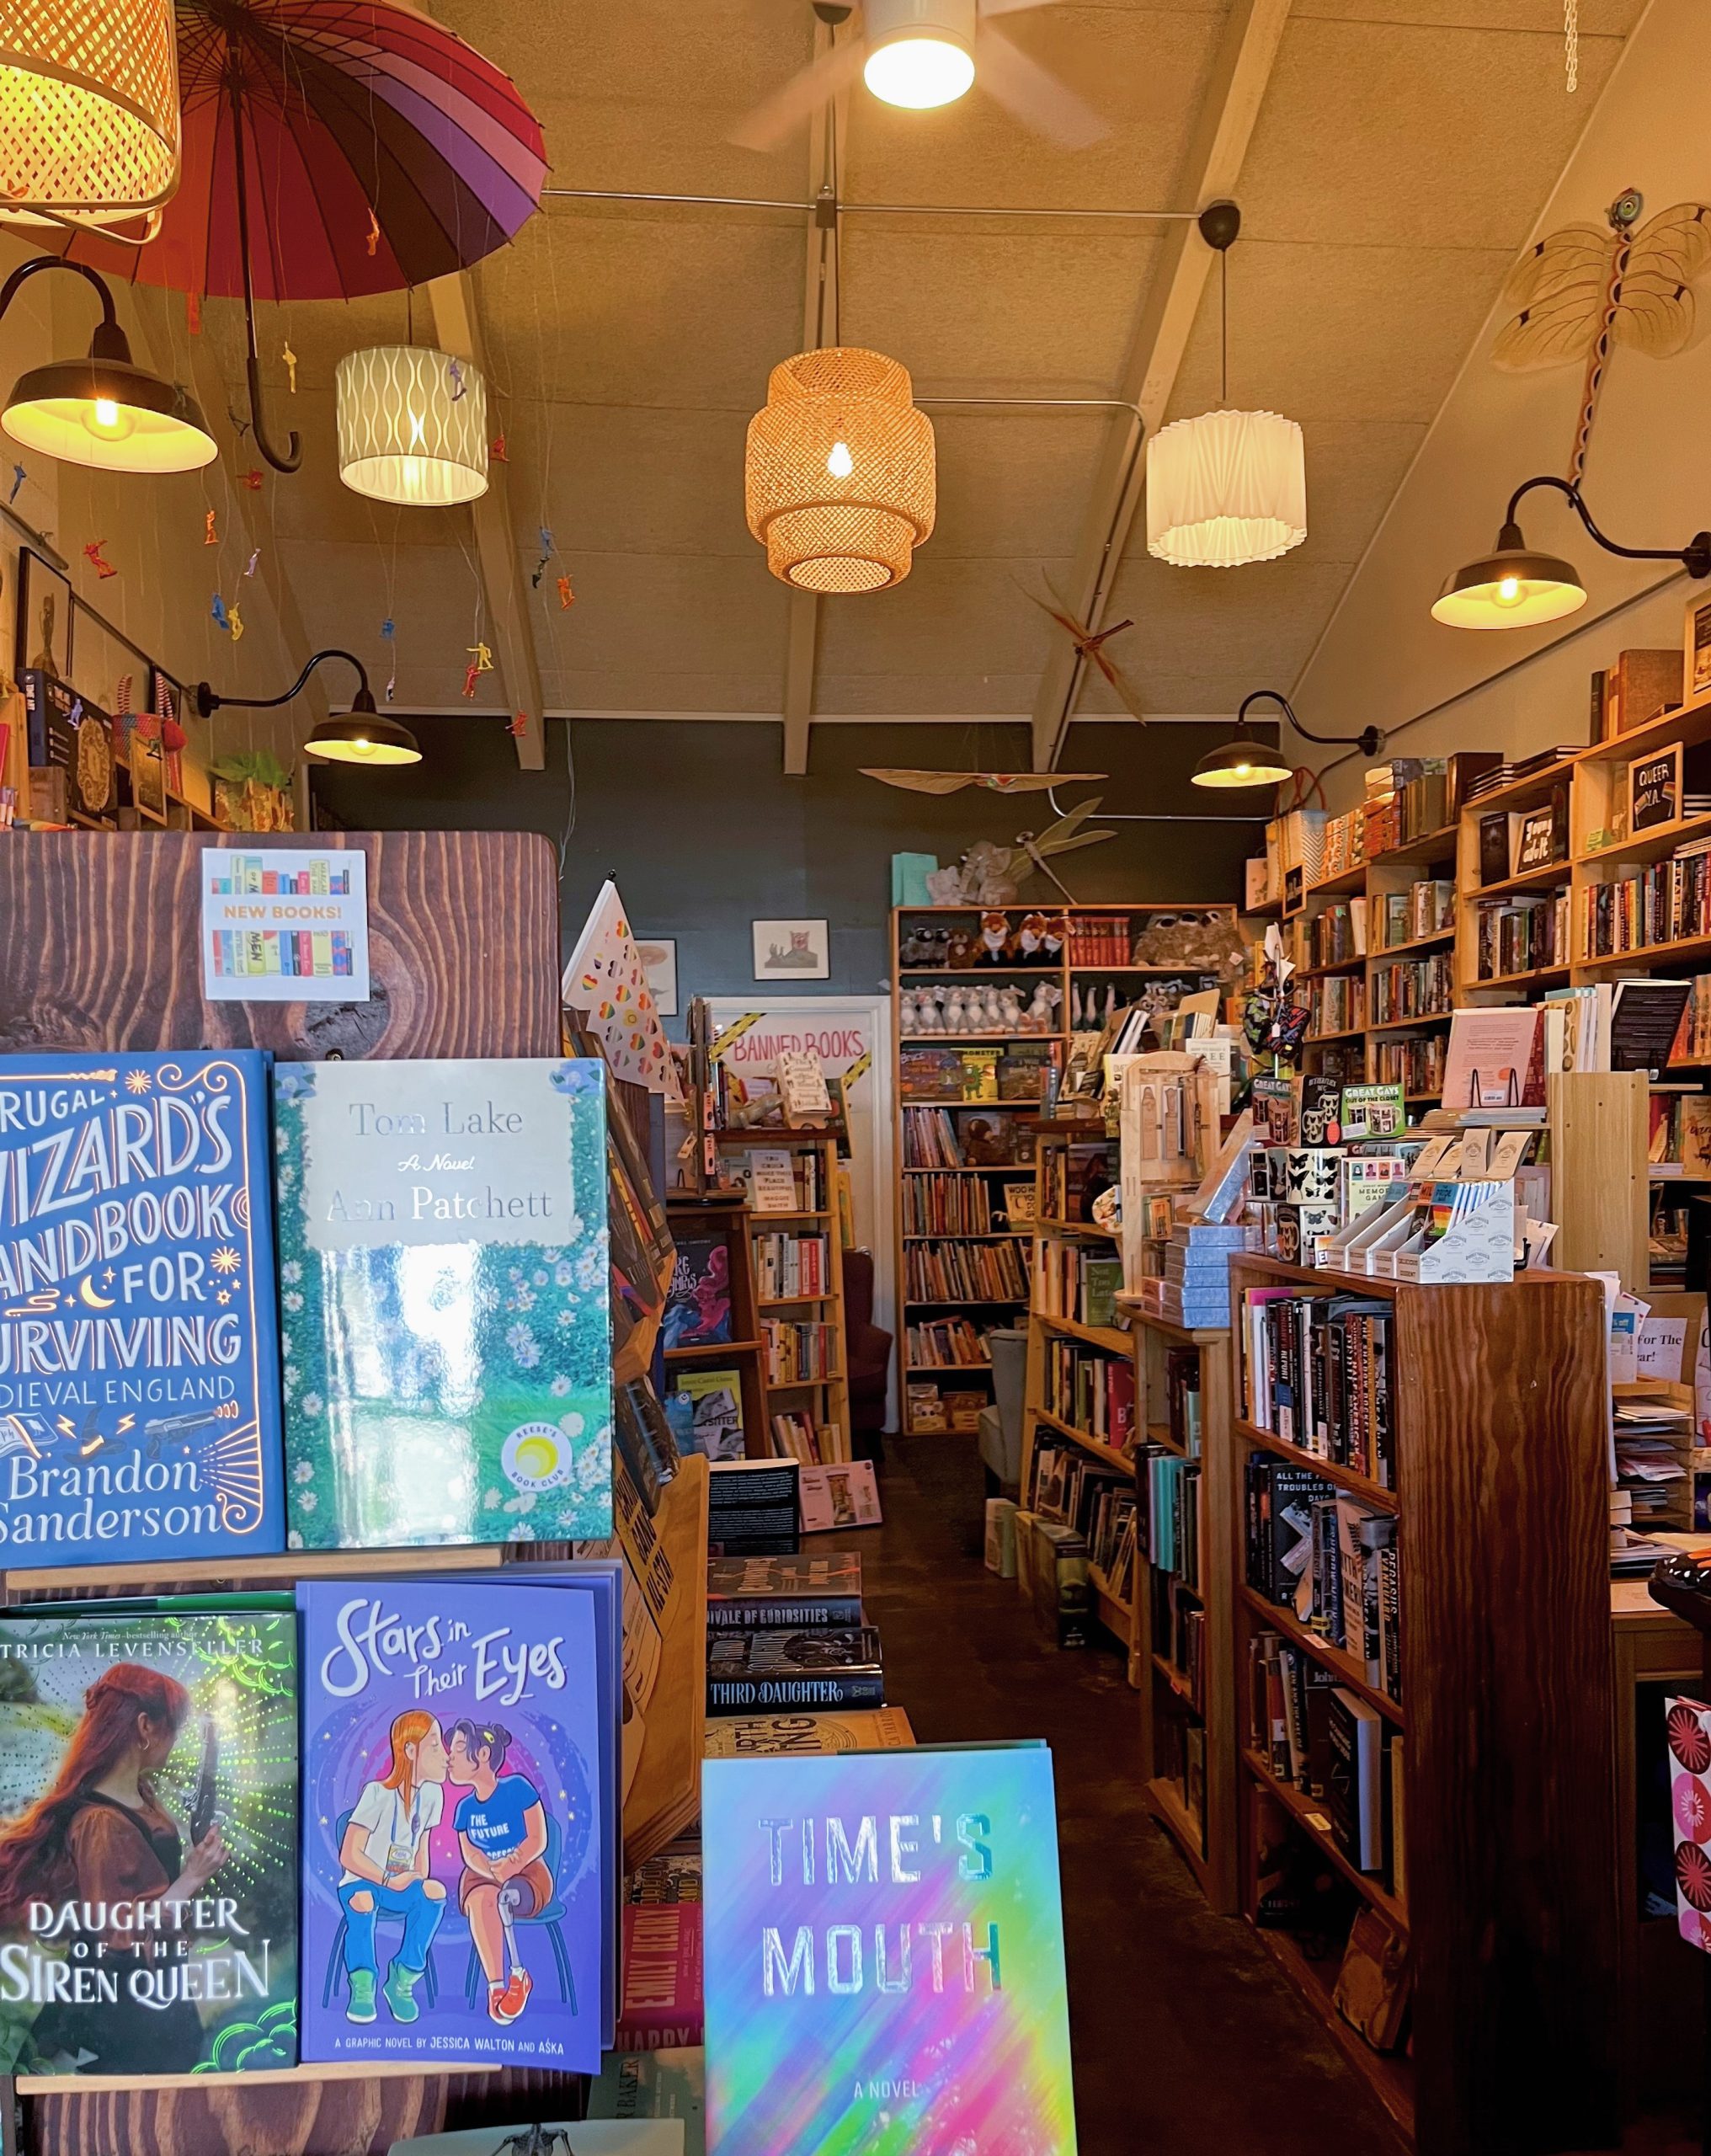 Interior of a bookstore filled with shelves